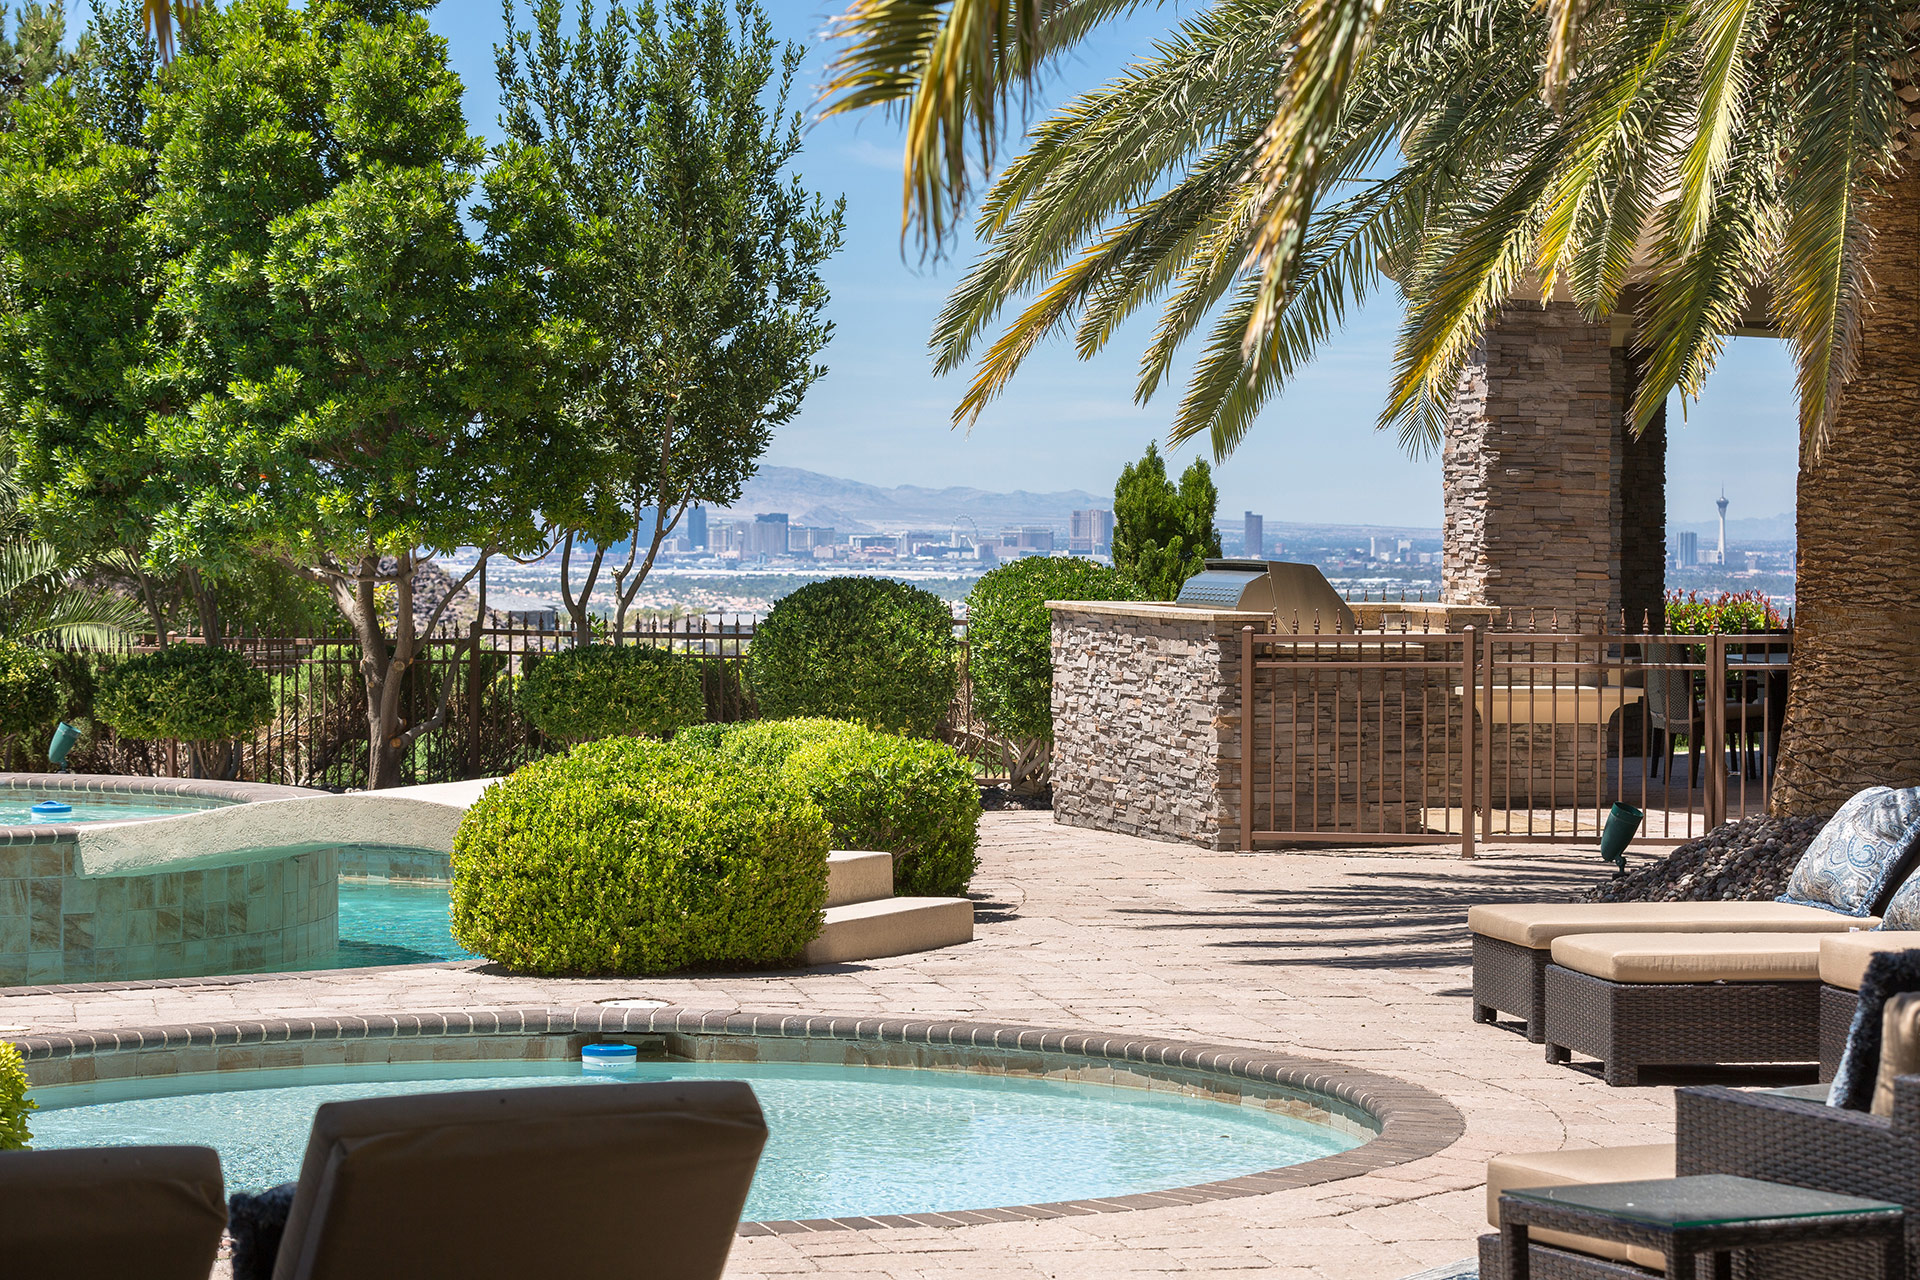 A wading pool, backyard grill with stone enclosure, palm fronds int he foreground, hedges and trees about and a daytime view of the Las Vegas strip in the background.